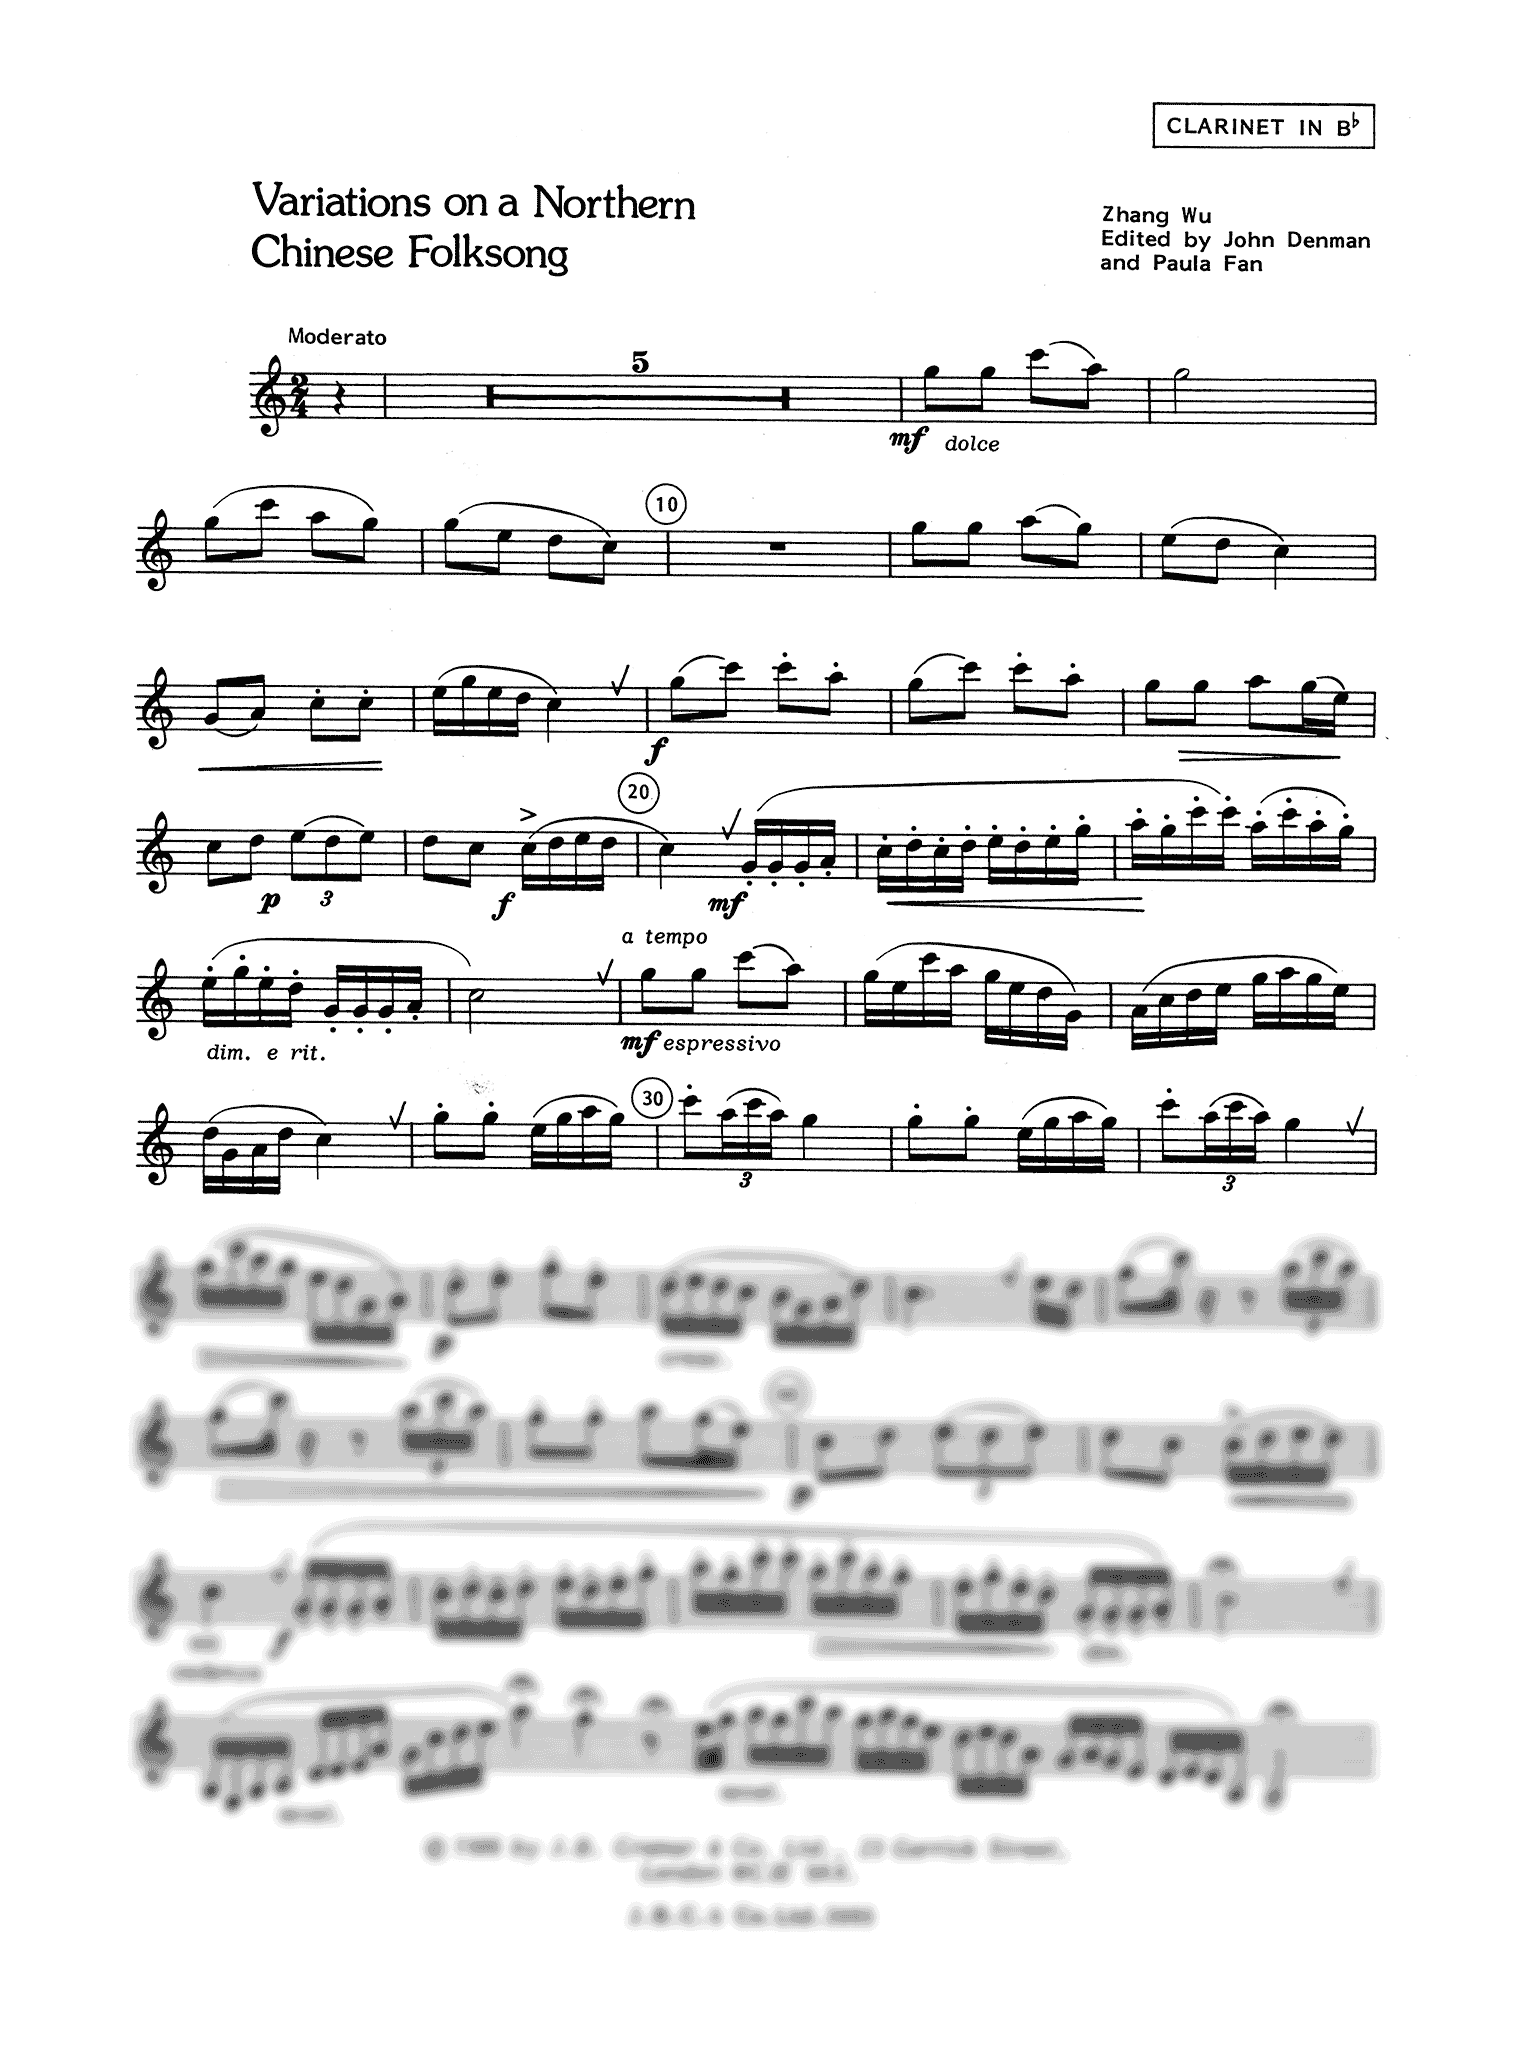 Zhang Wu Variations on a Northern Chinese Folksong clarinet part